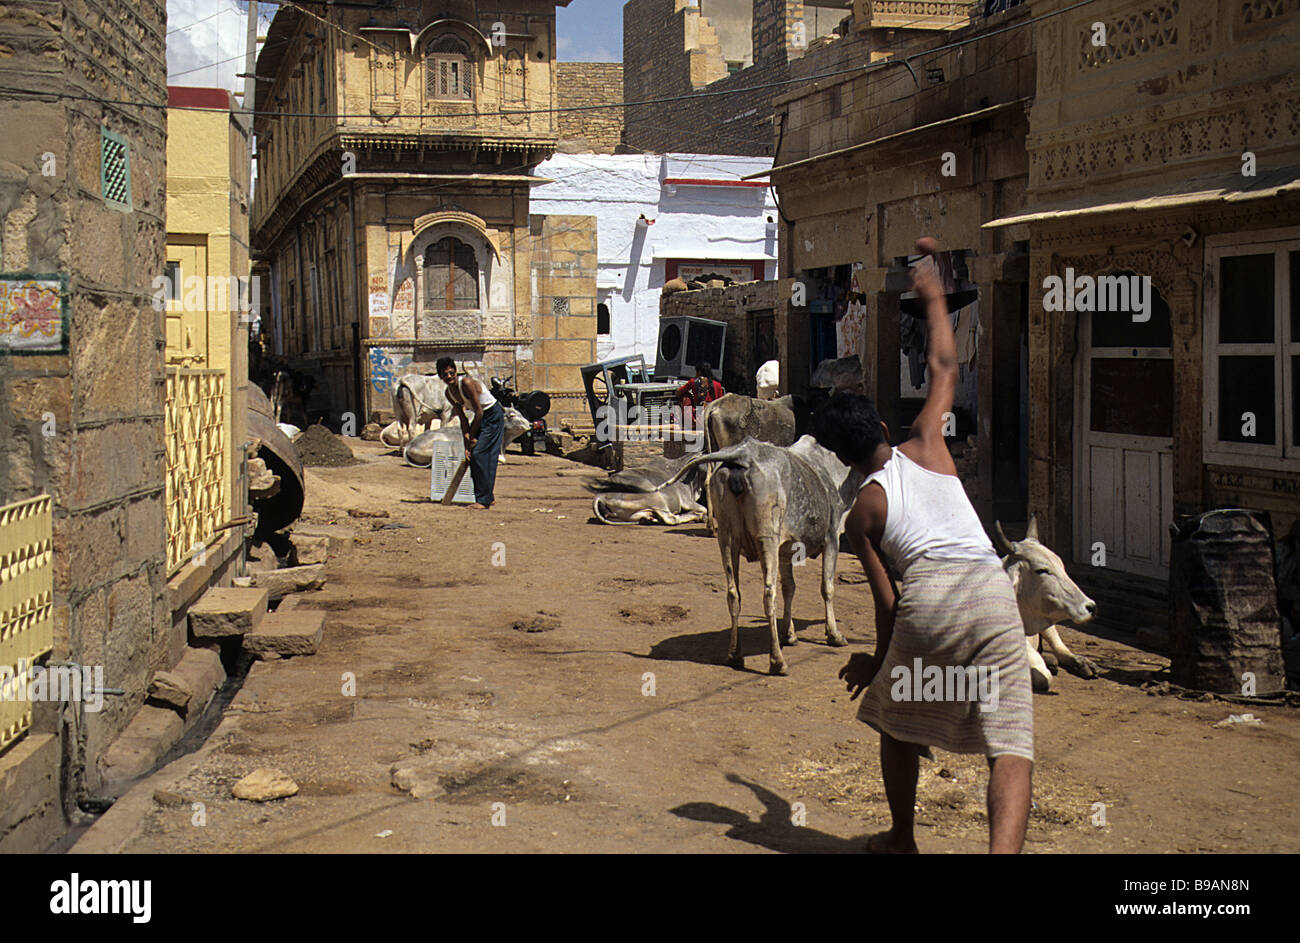 Jaisalmer, Rajasthan, India. Informal game of cricket being played in a back street. Stock Photo